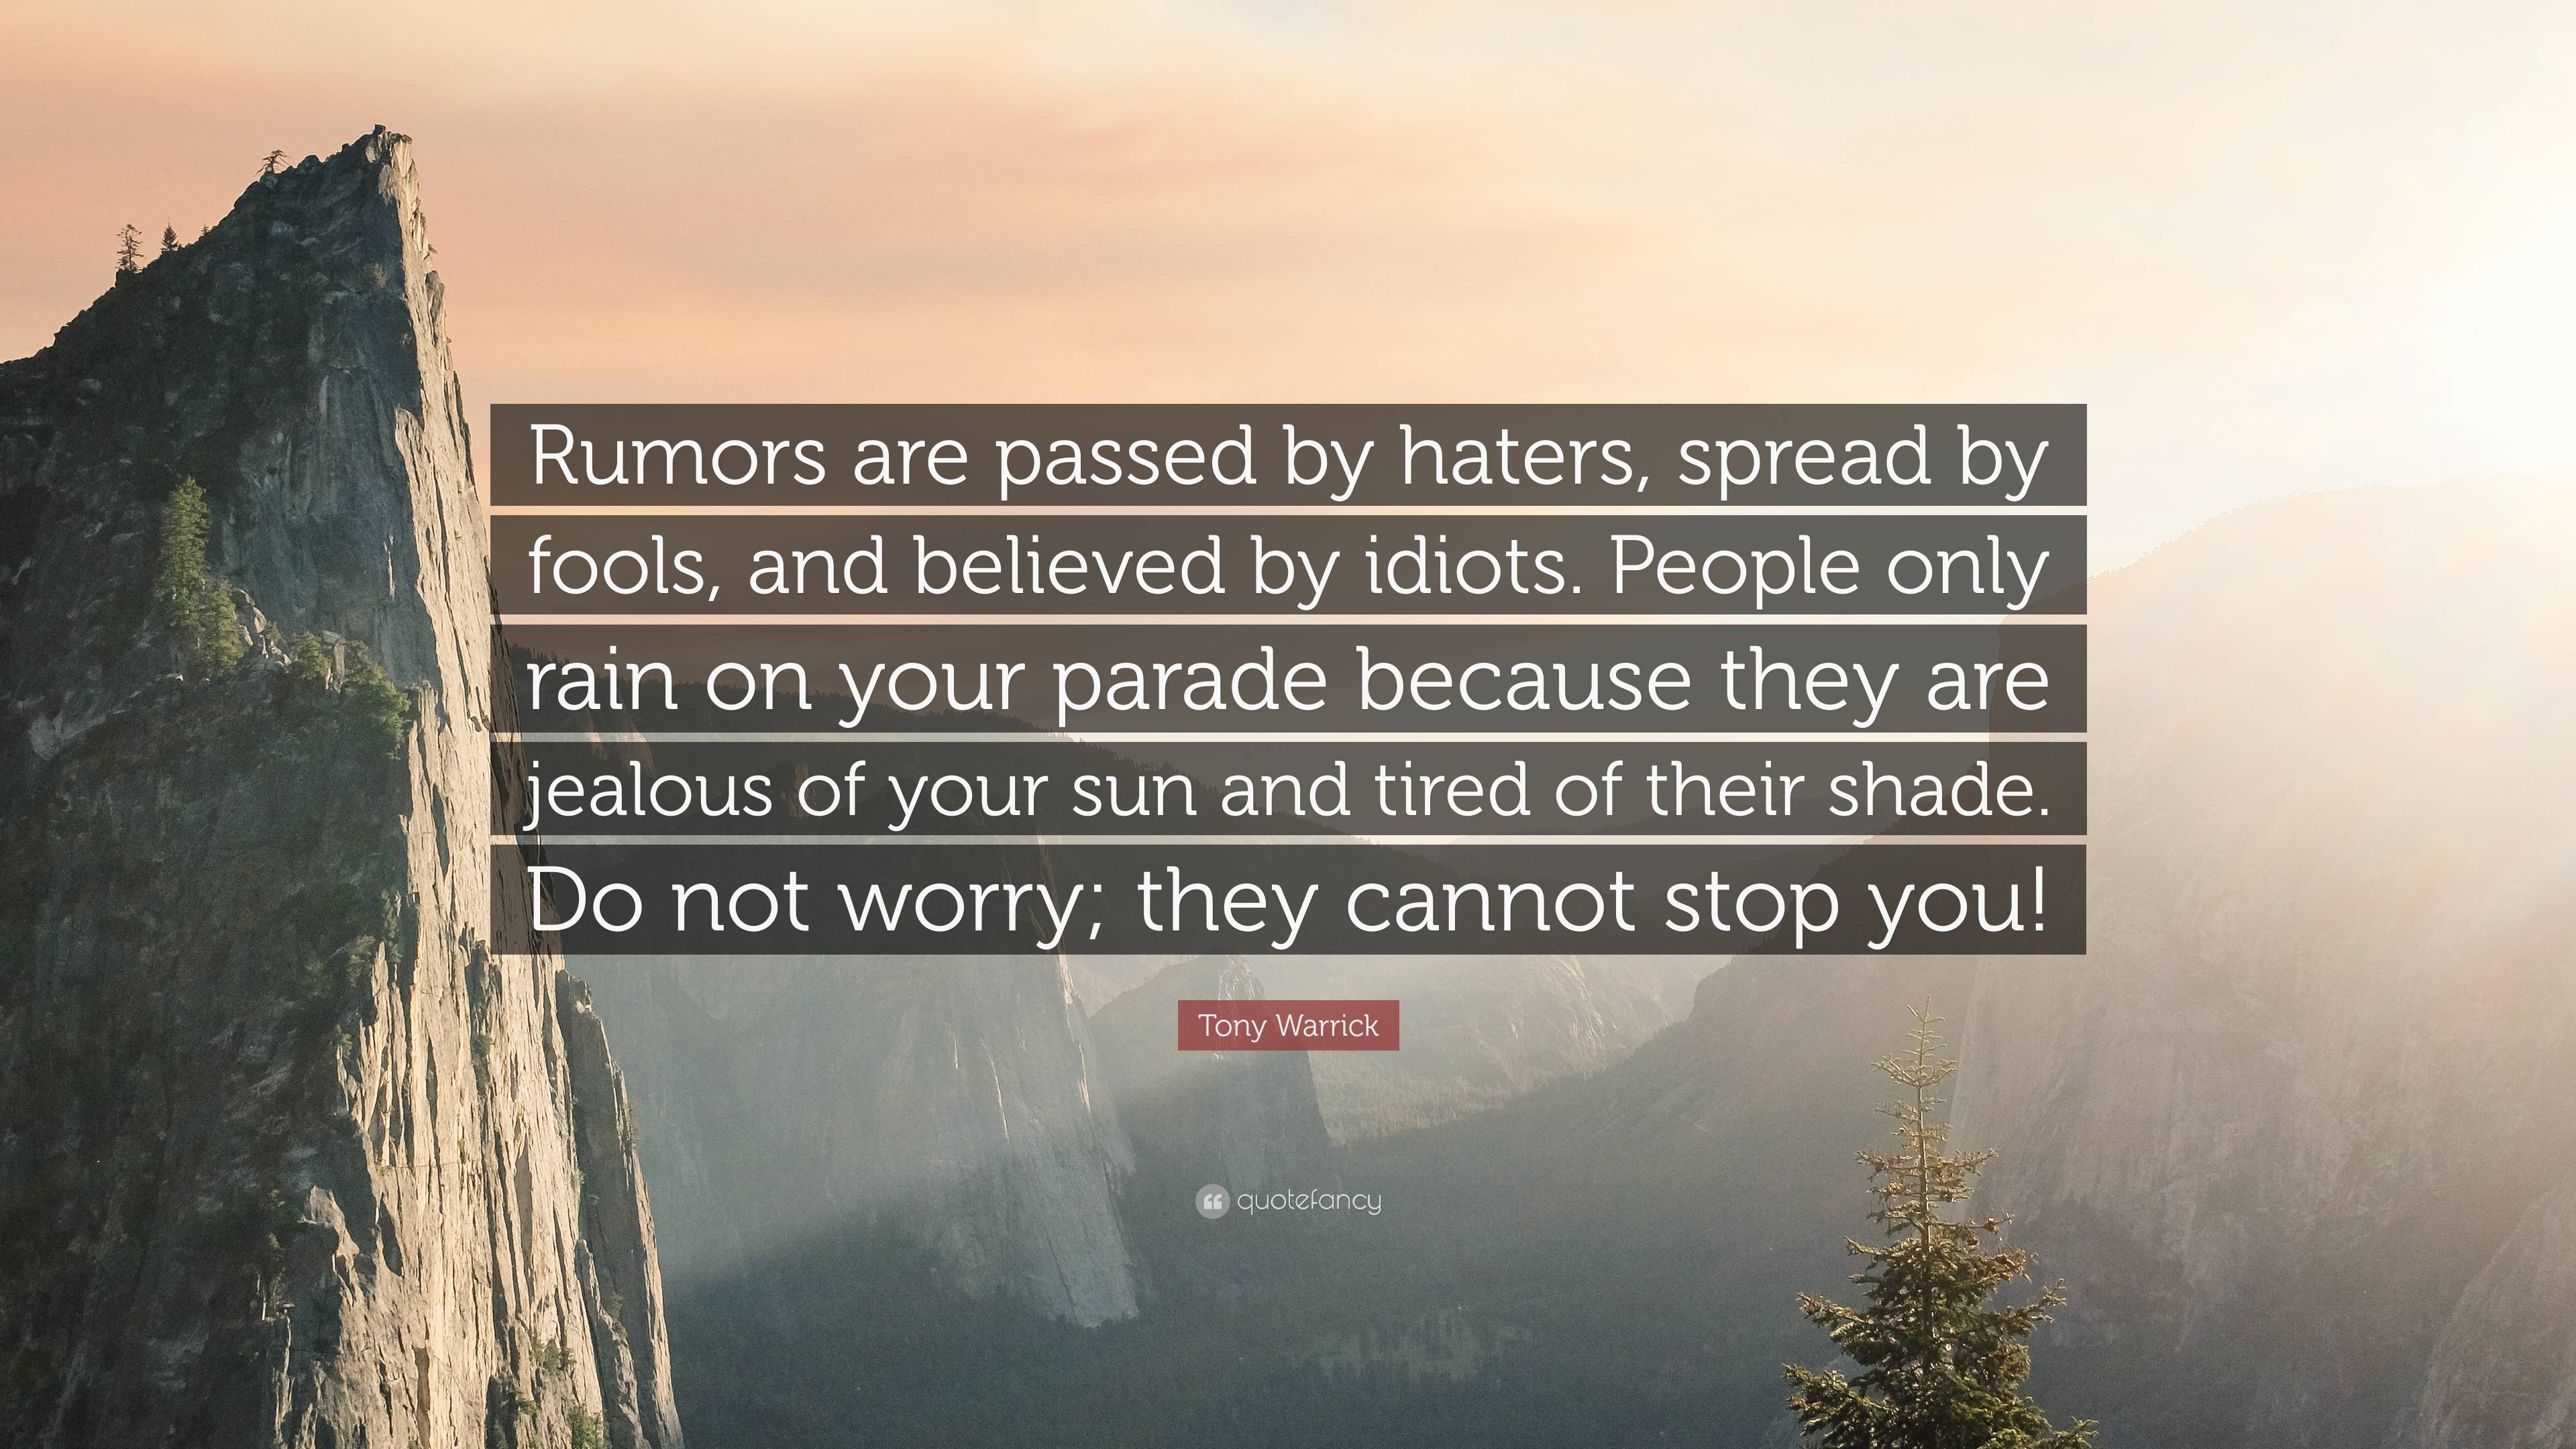 quotes about rumors and haters